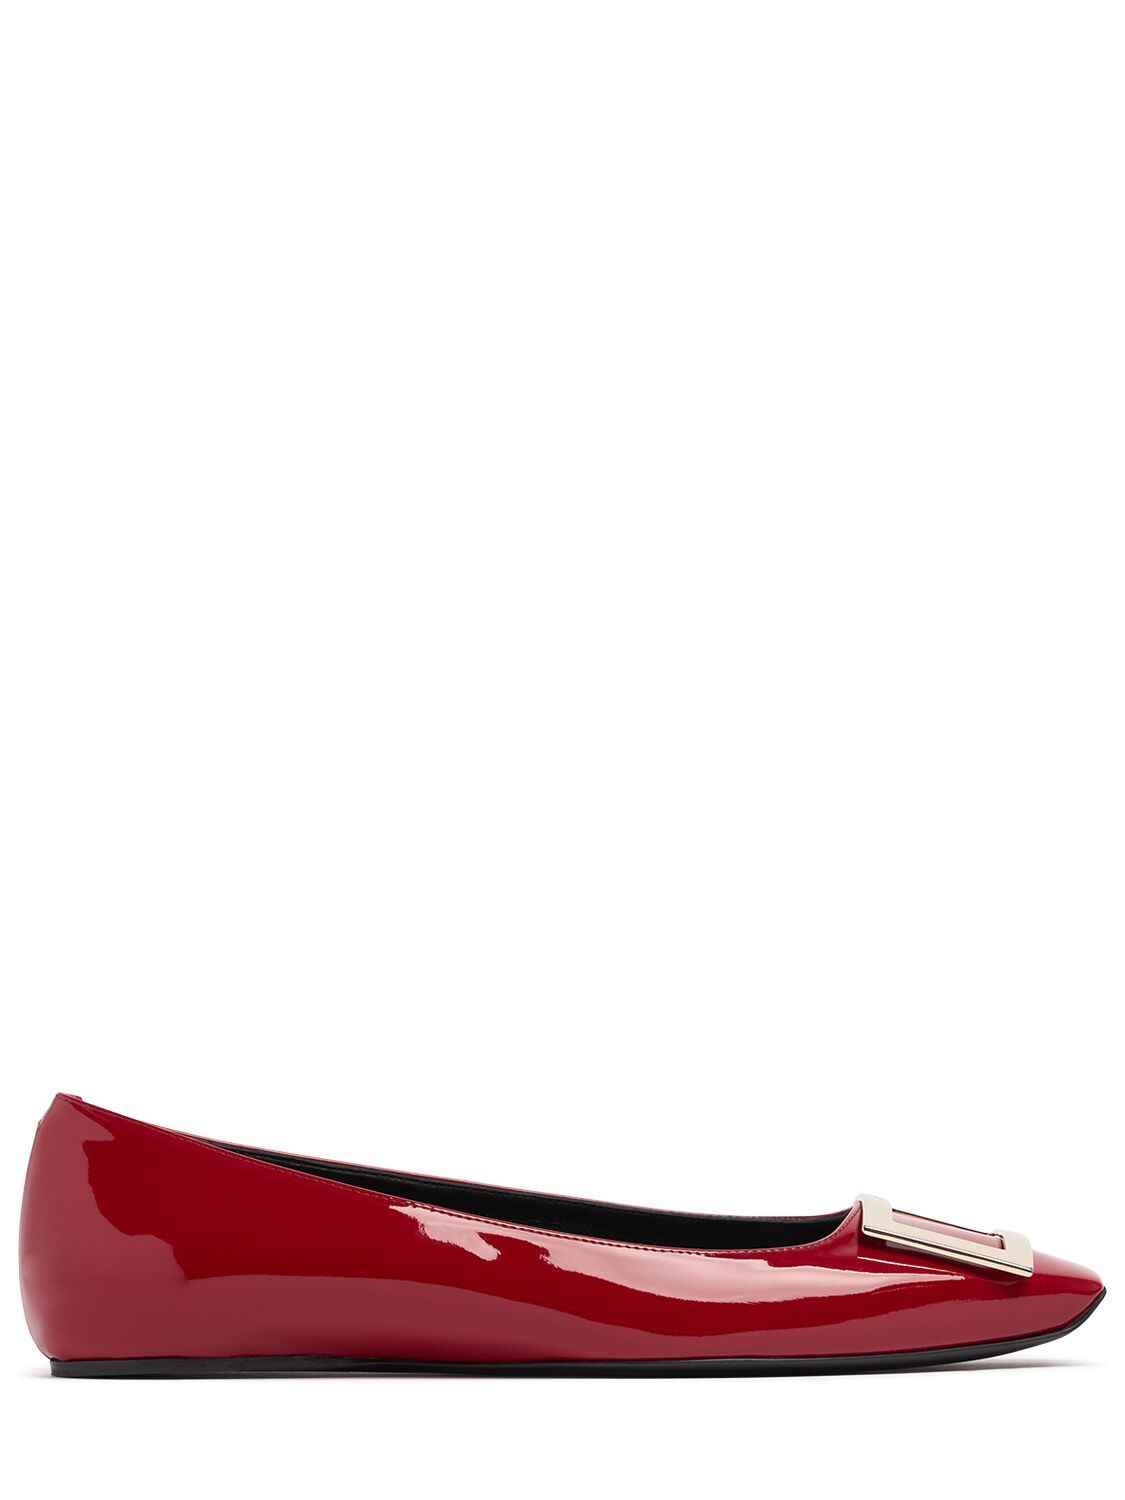 Roger Vivier 10mm Trompette Patent Leather Flats In Red